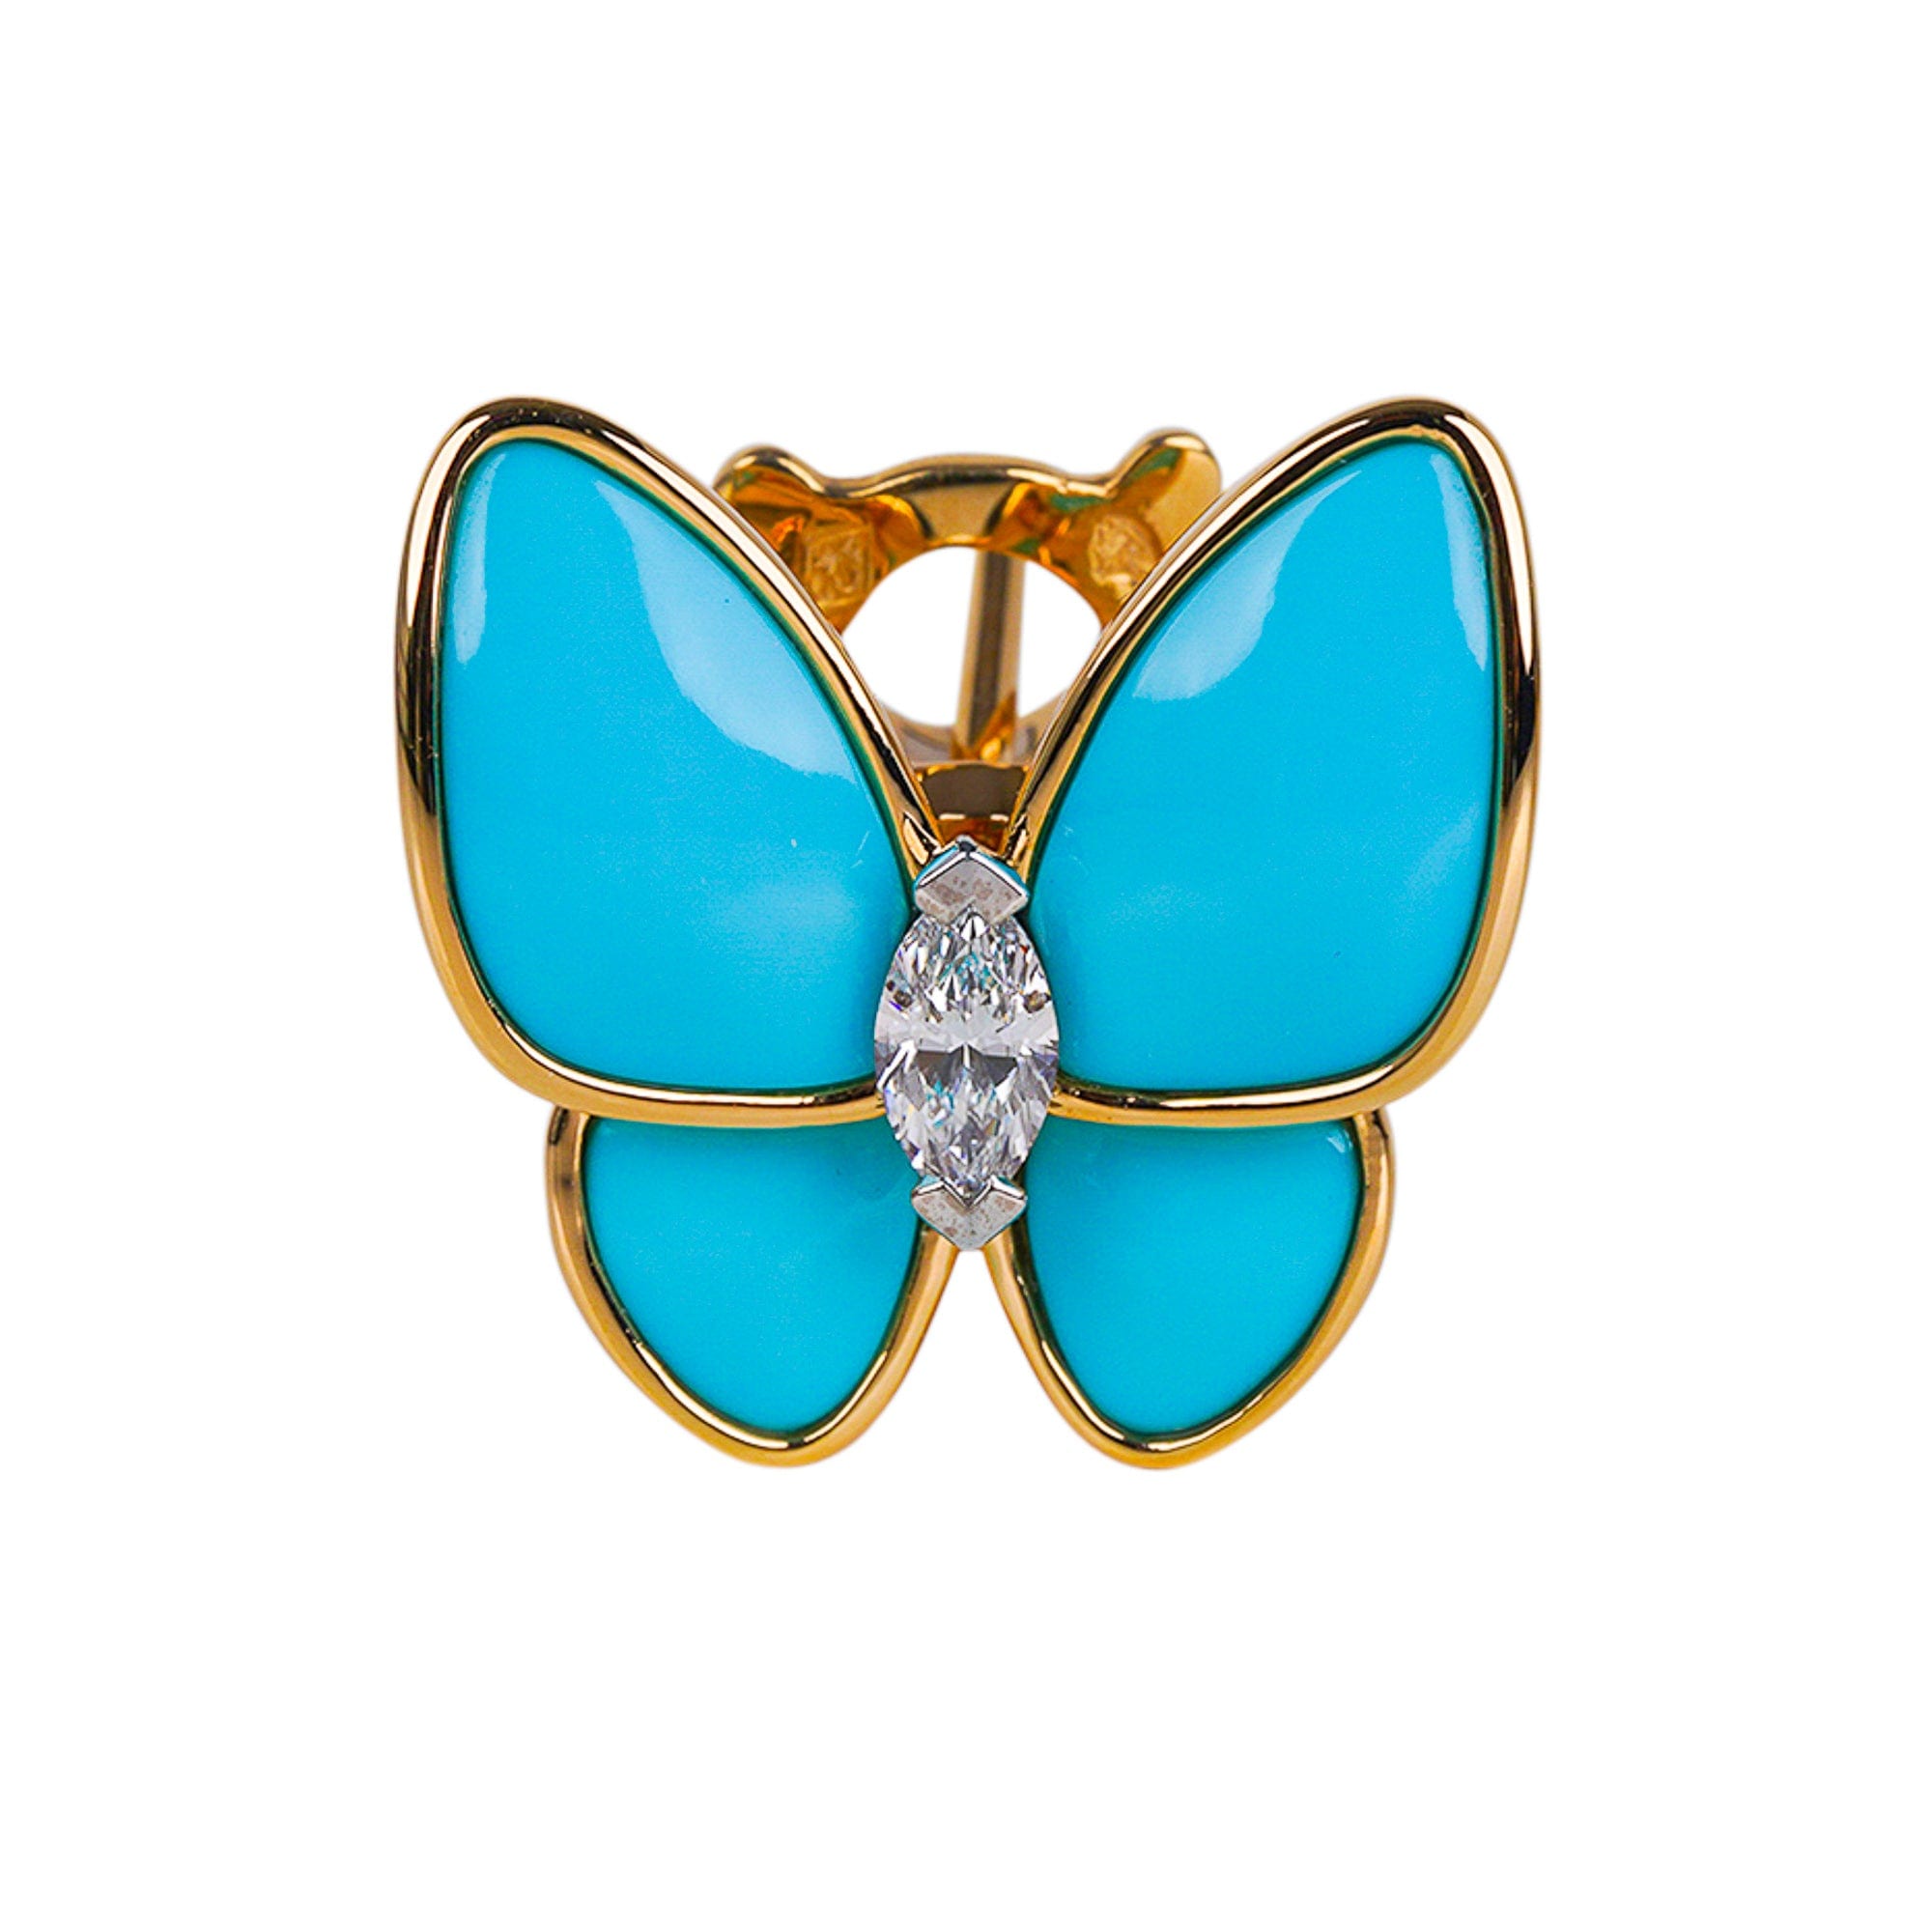 Tiffany's Butterfly Diamond Painting Kit at